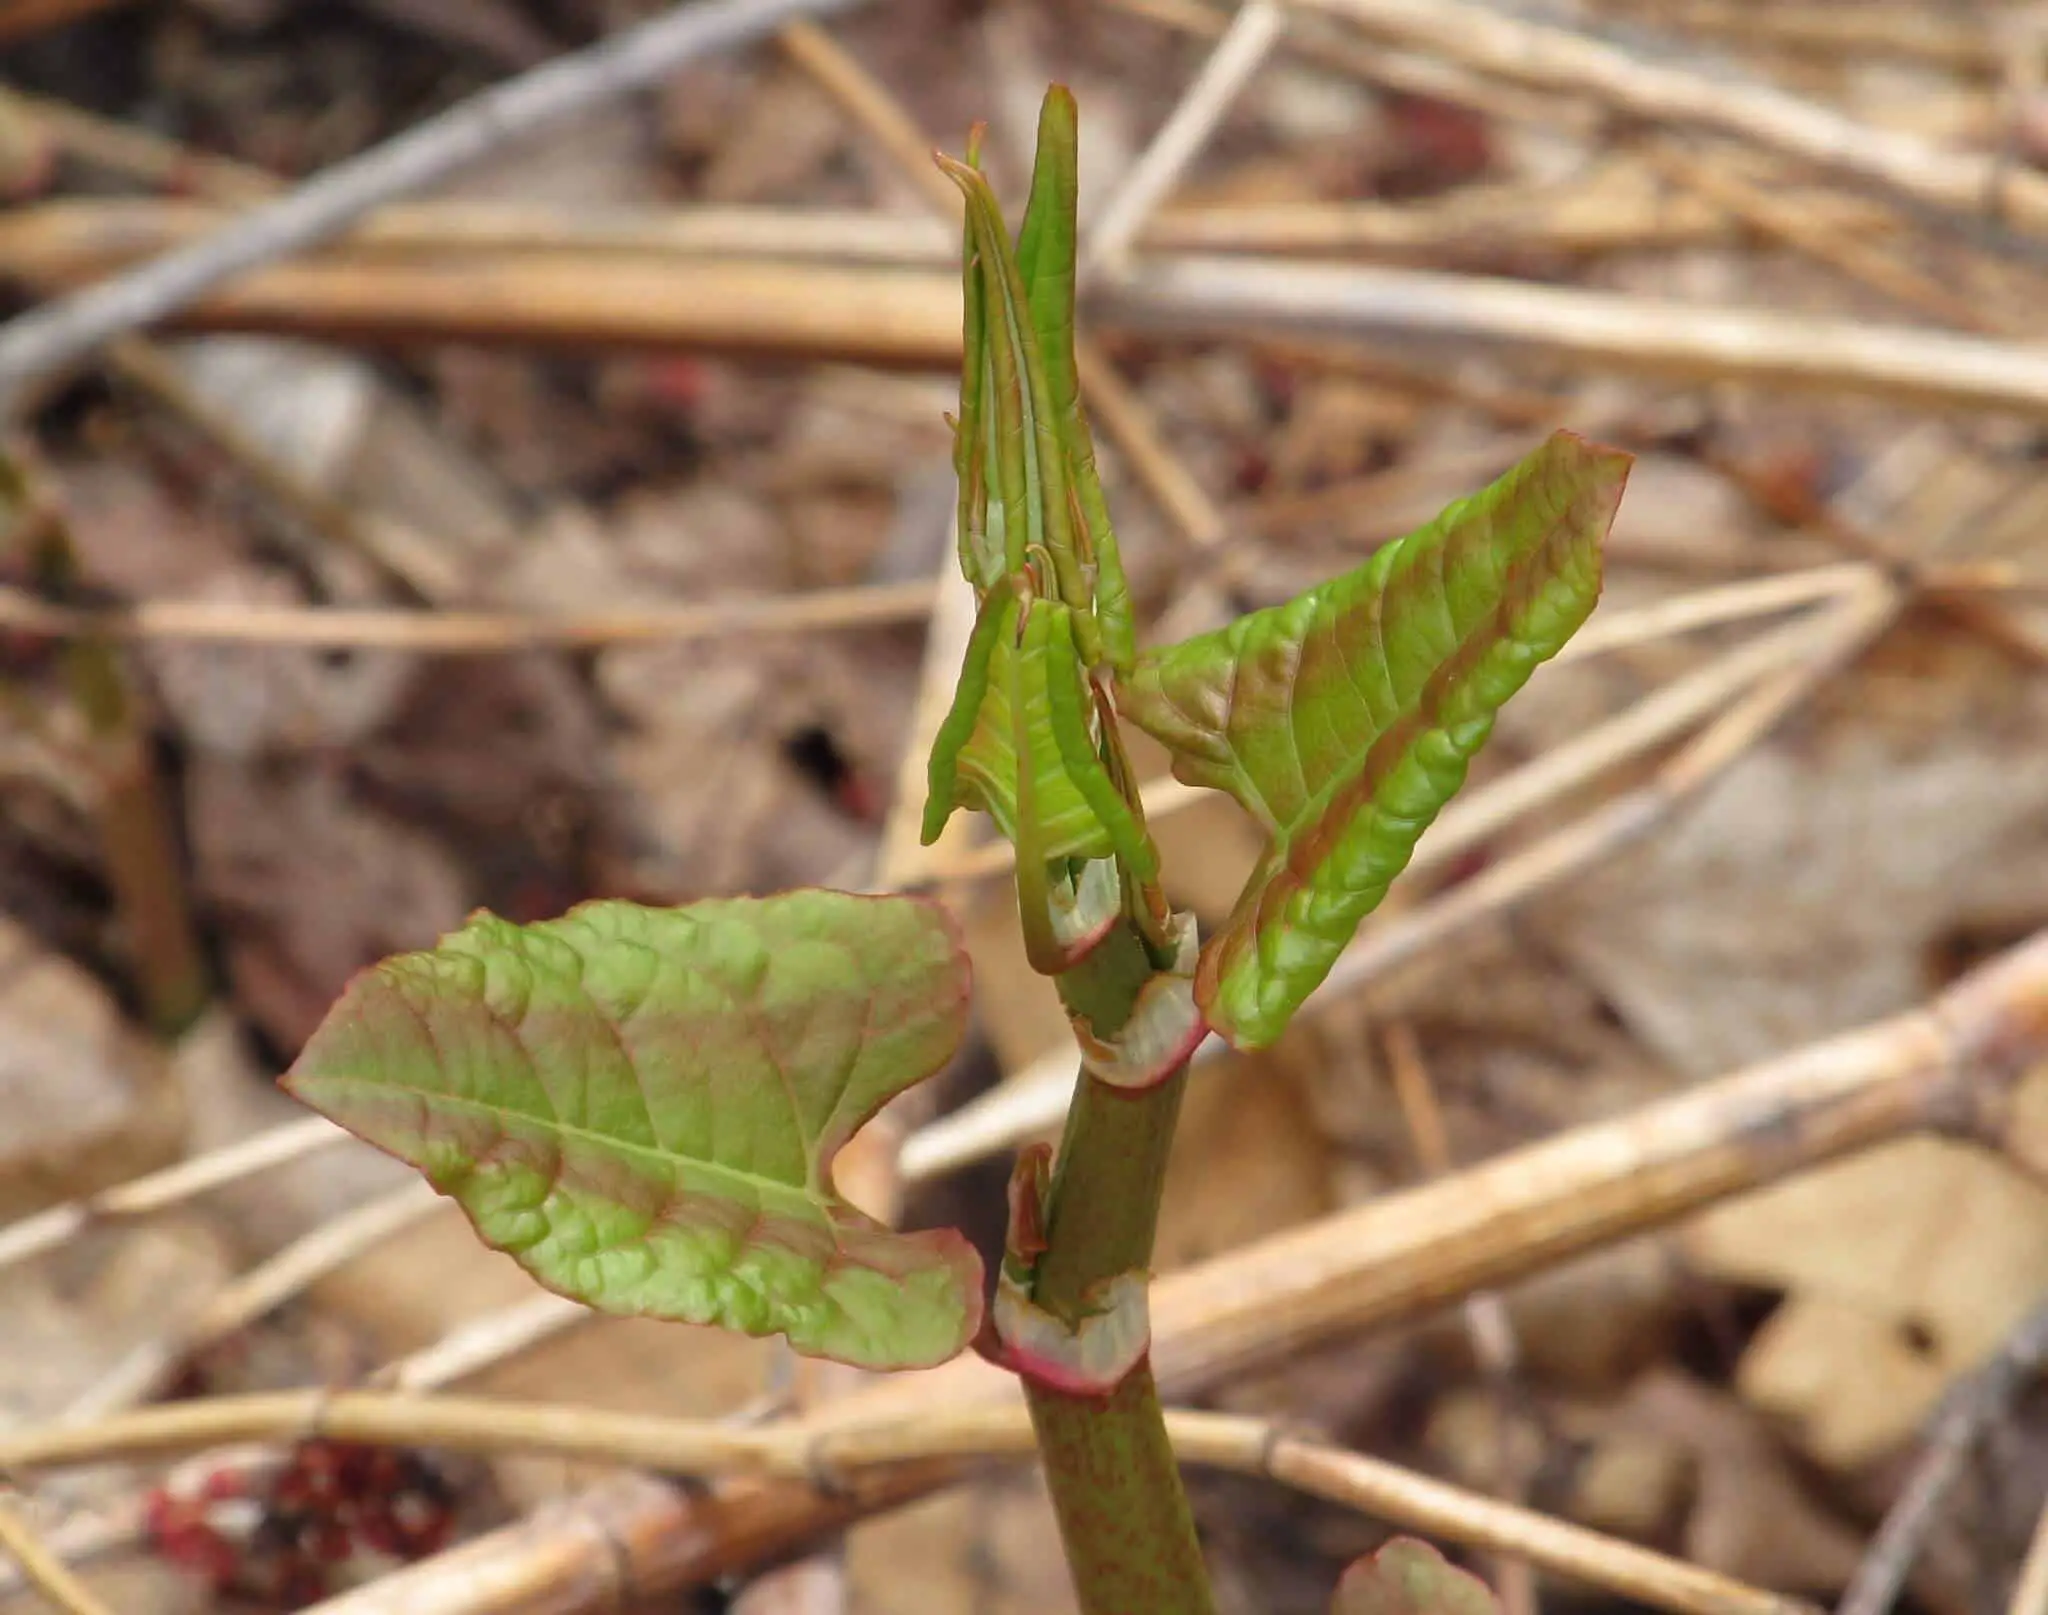 Japanese knotweed in spring showing early signs of growth with new shoots